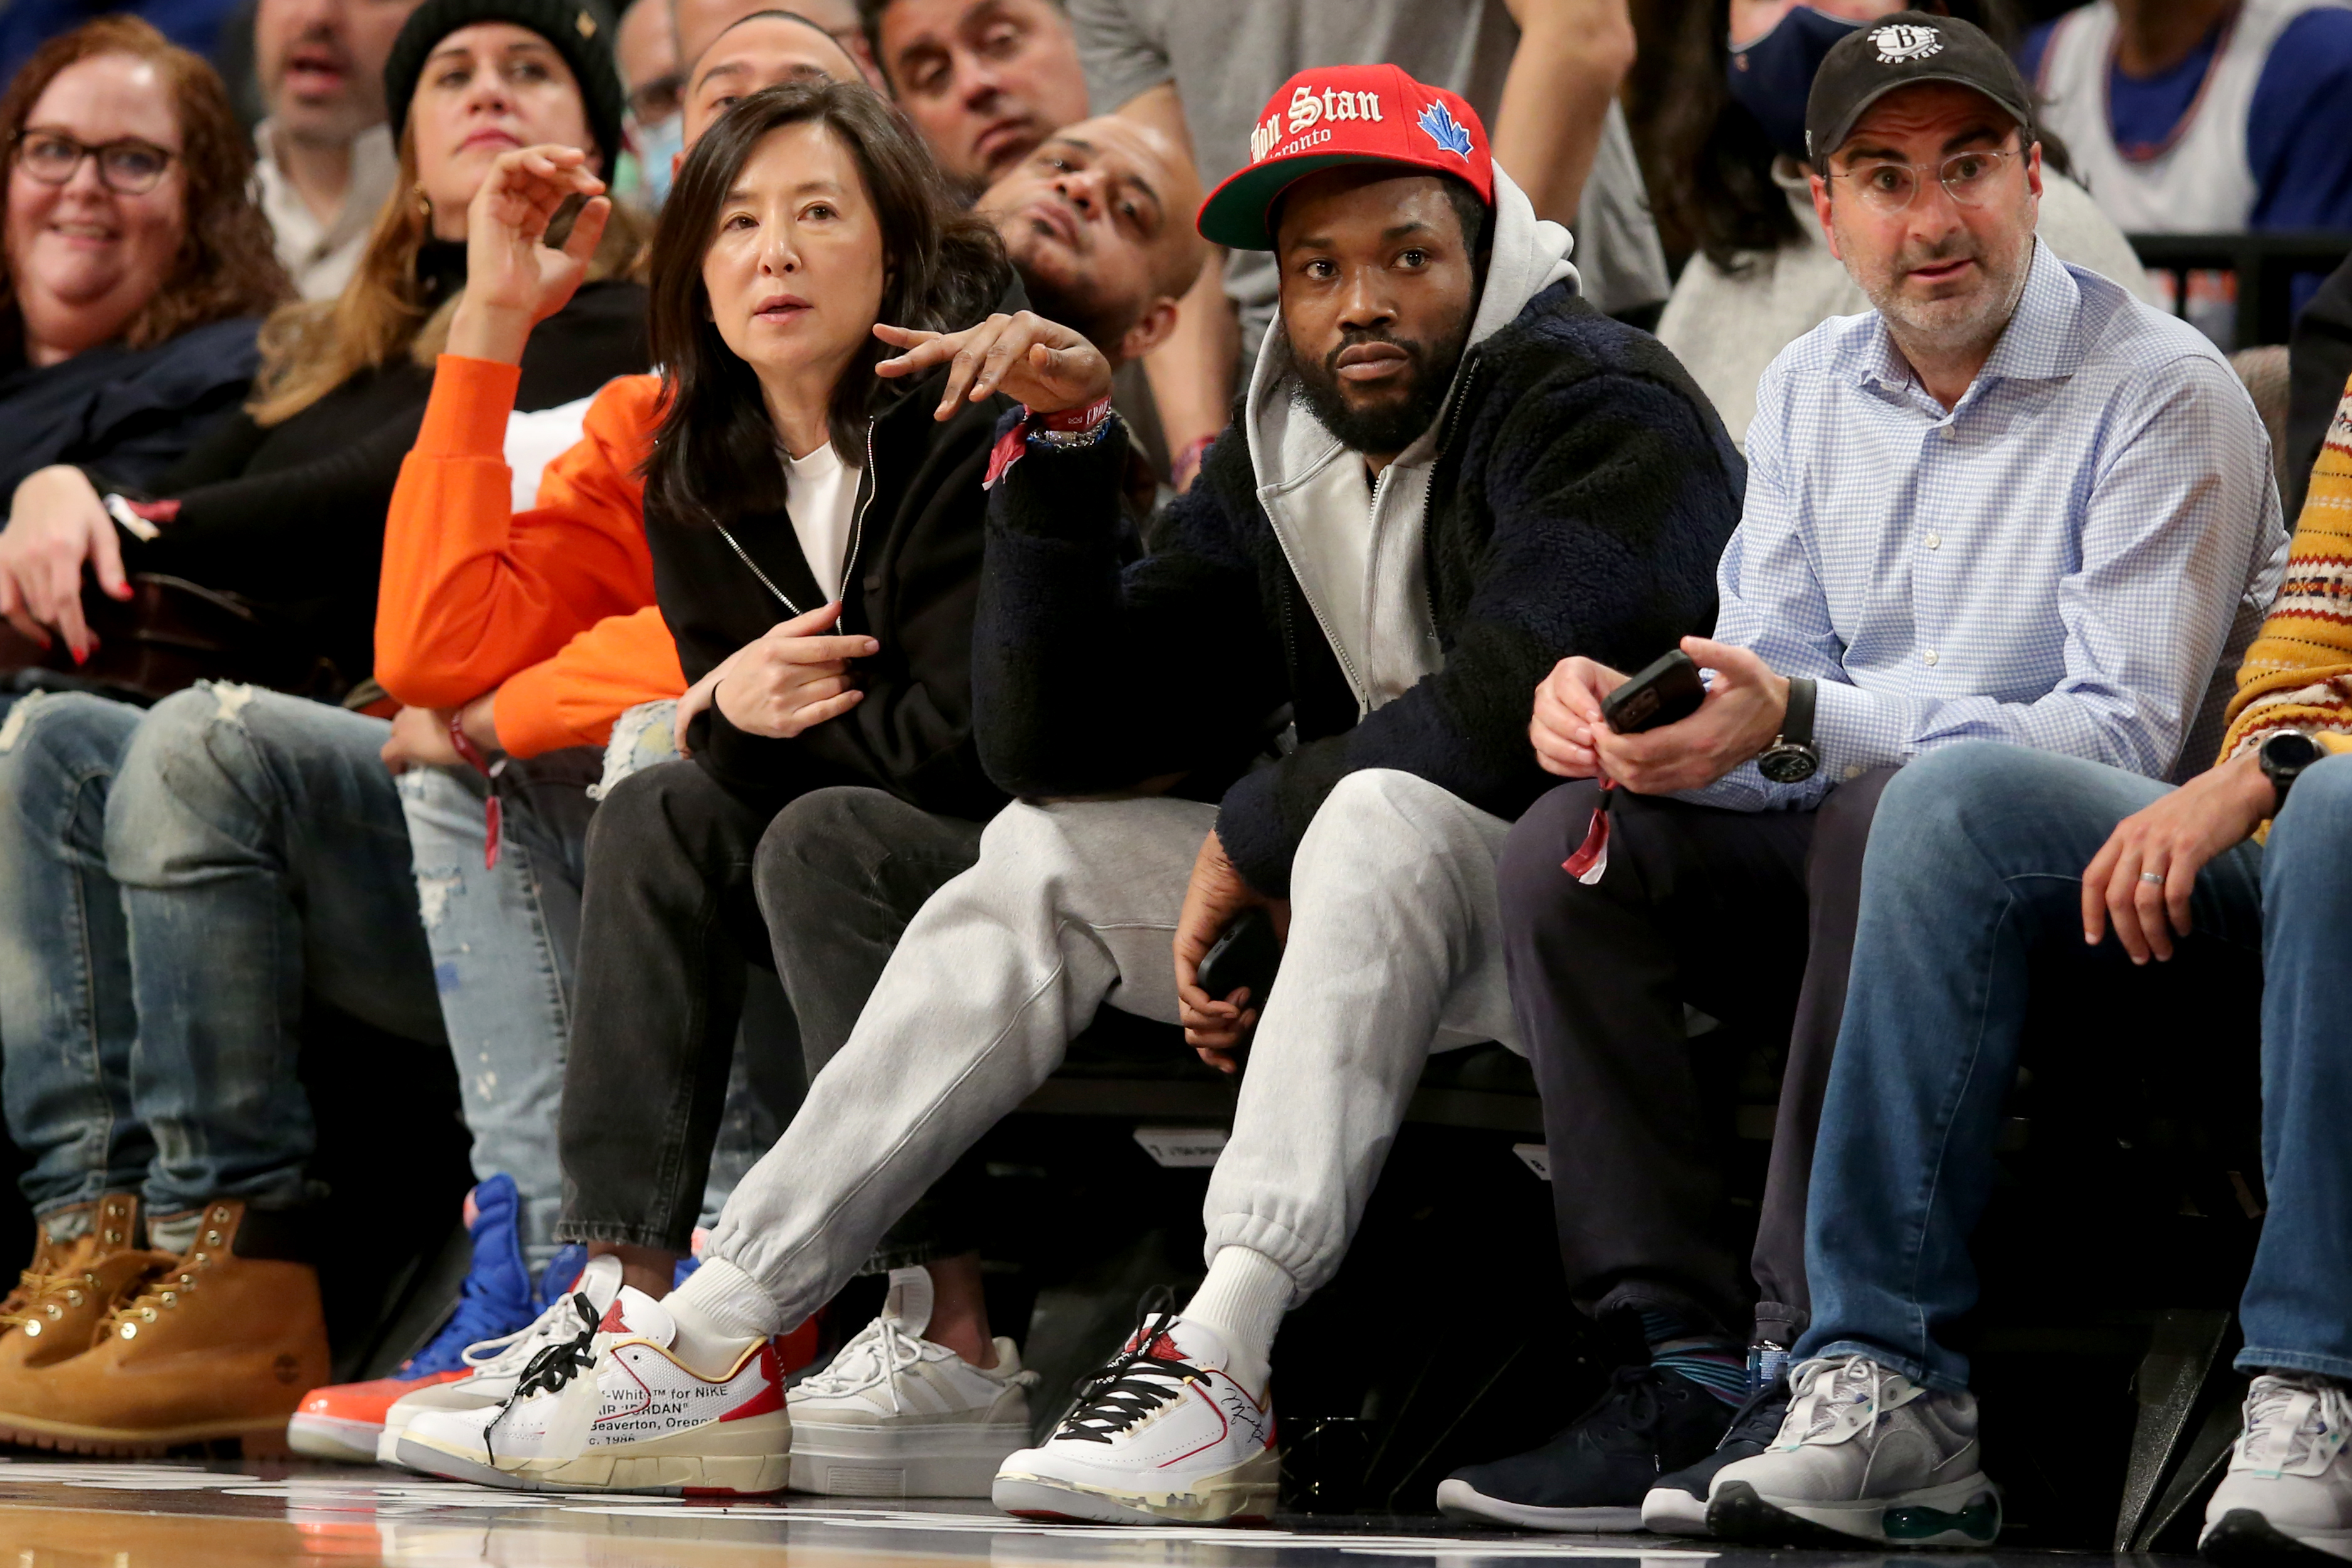 Meek Mill Courtside Barclays Center 2021